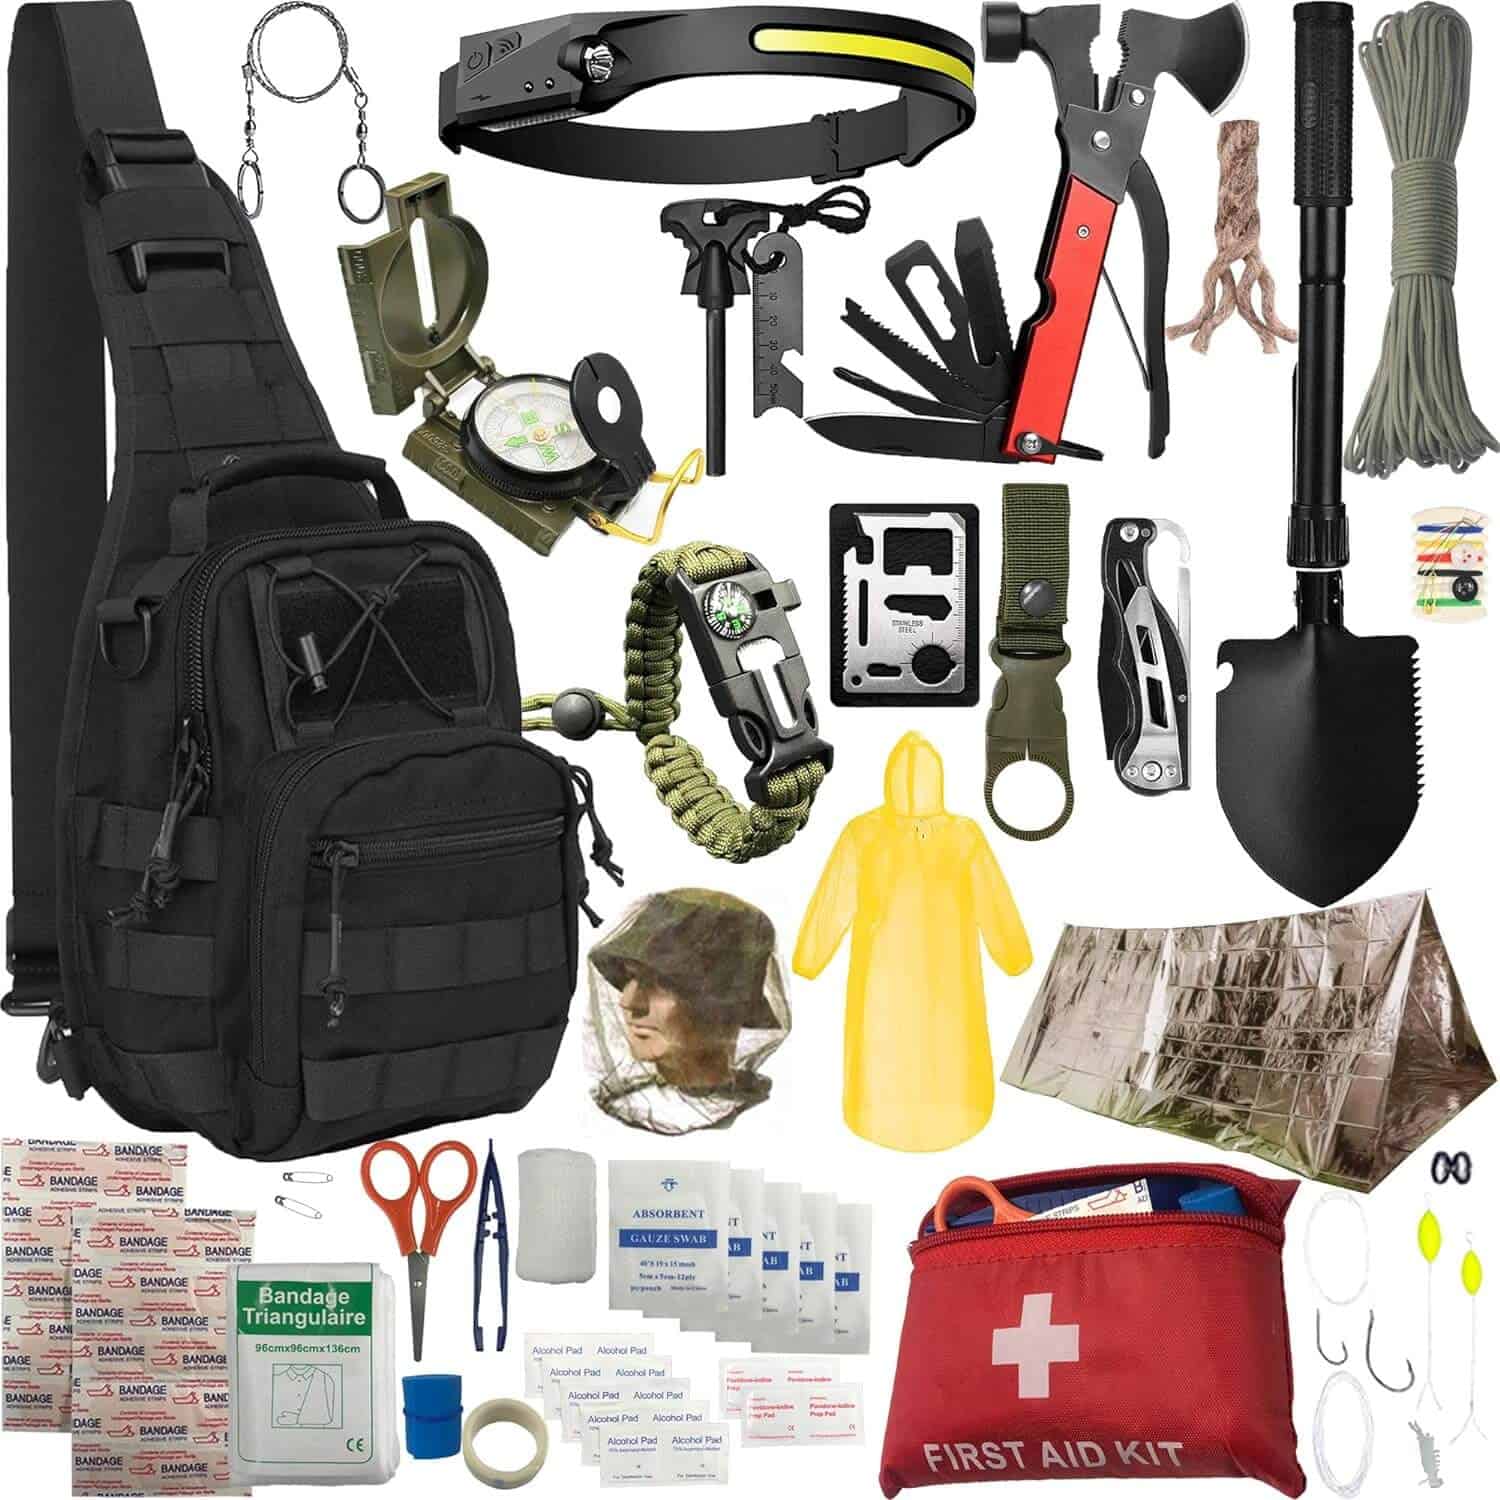 Surviva backpack kit with Oxford fabric, a Multifunction Axe Hammer, Saber Card, Shovel, Survival Bracelet, Foldable Knife, Mini Fishing Kit, Rechargeable LED Headlight, Thick Raincoat, Lensatic US Army Compass, Emergency Shelter, Fire Starter, Bottle Holder Clip, Mosquito Head Net, Parachute Cord, Wire Saw, Foldable Shovel, and a complete First Aid Kit, among other items.